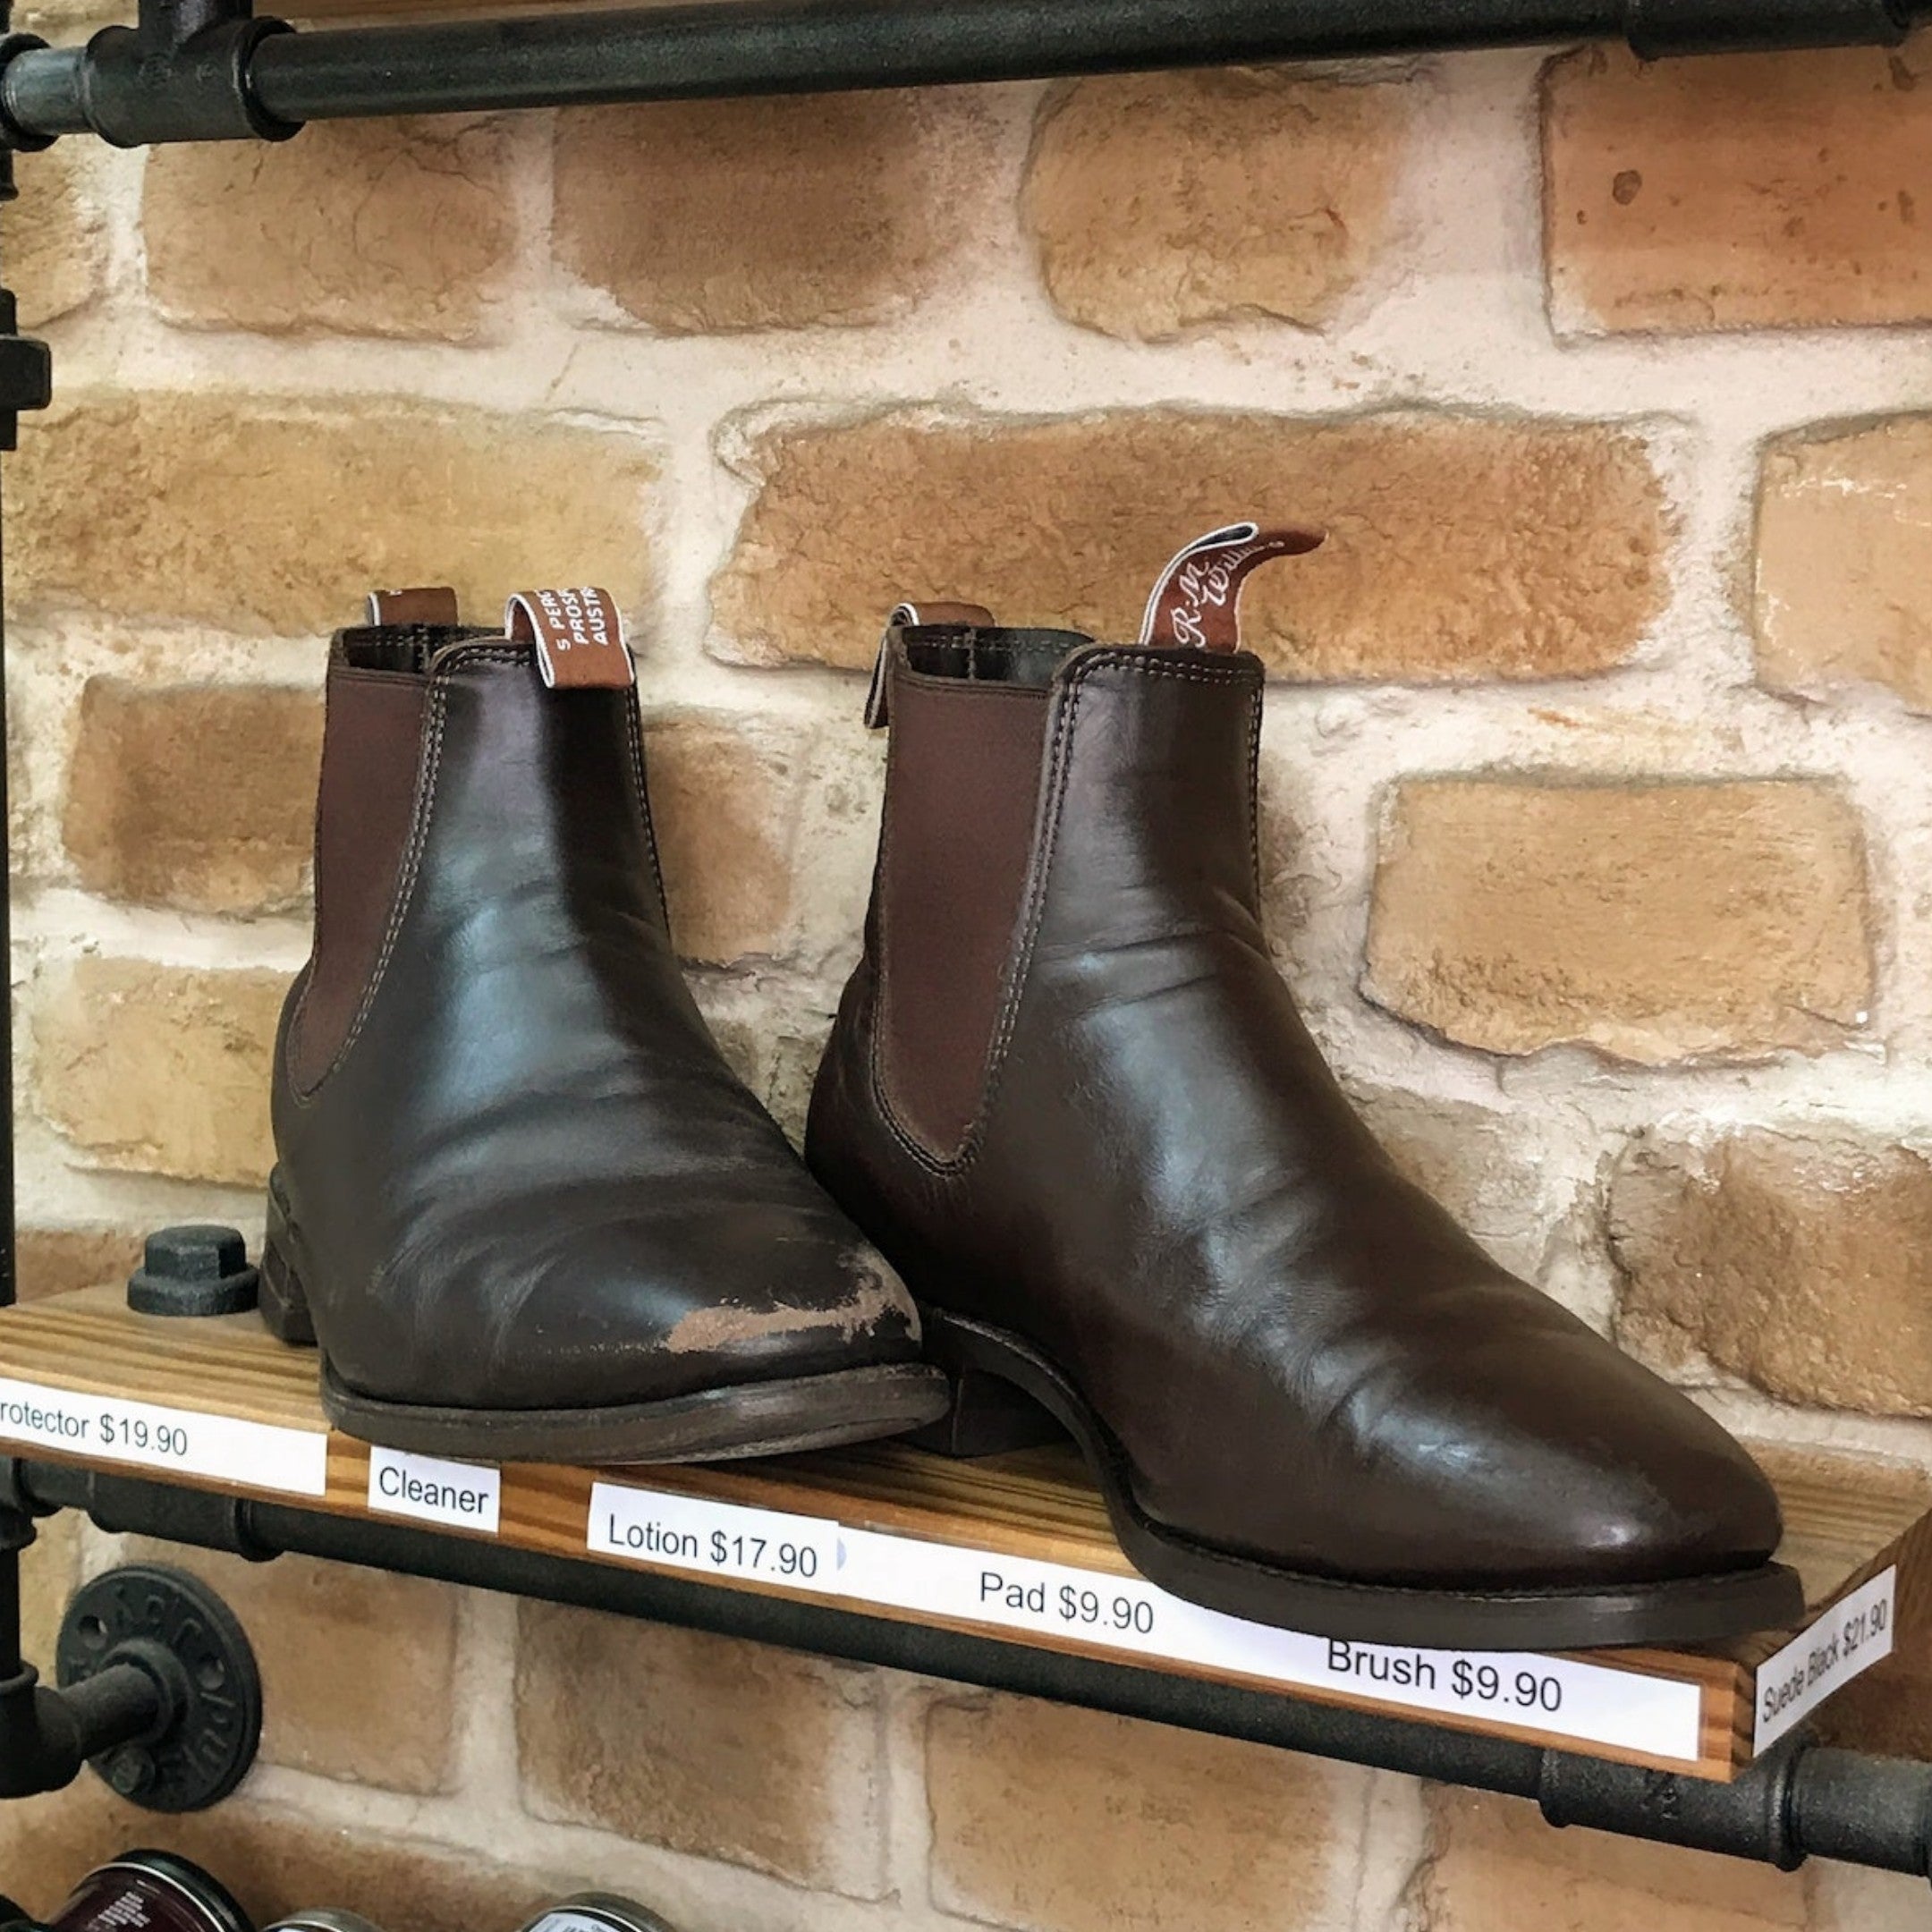 R.M. Williams Boots Gouged Leather Repair — SoleHeeled